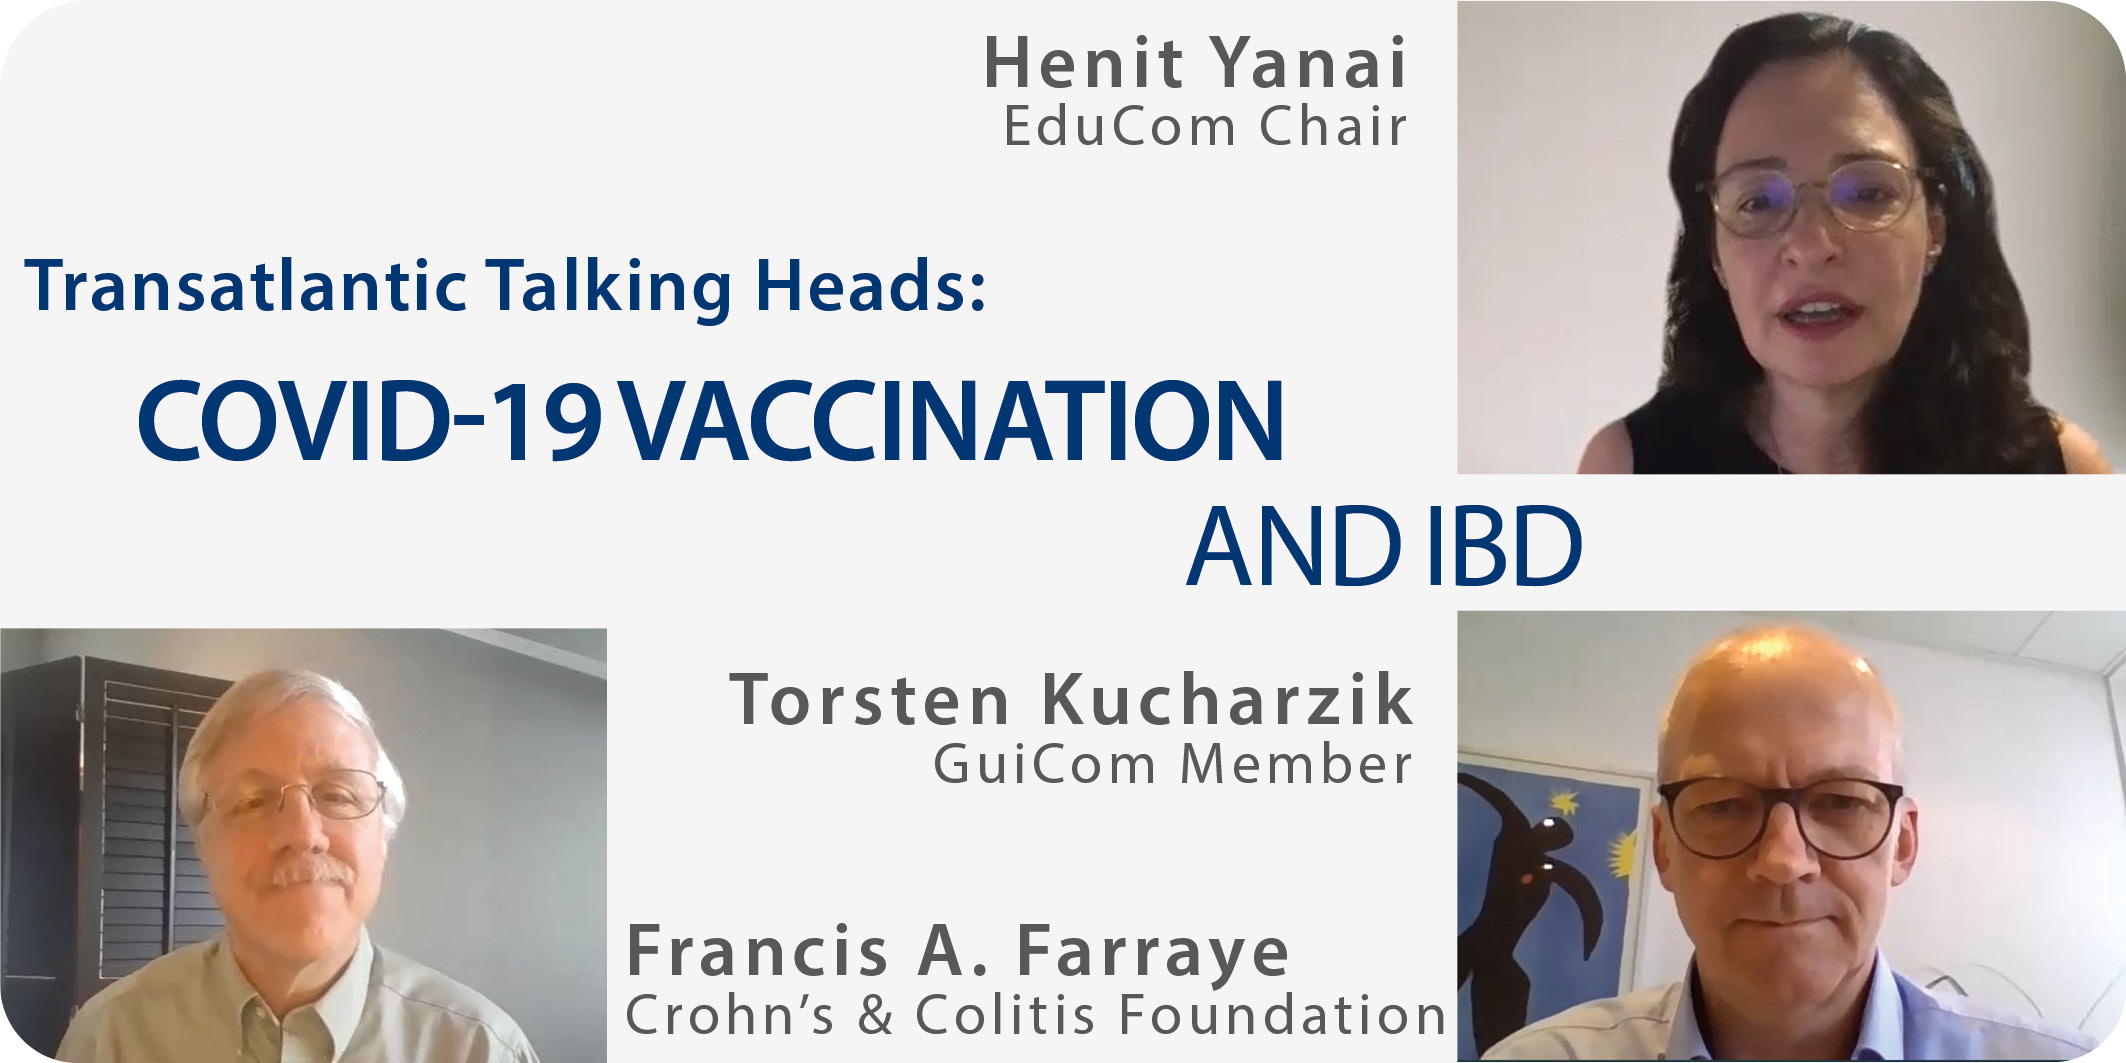 Covid-19 vaccination and ibd